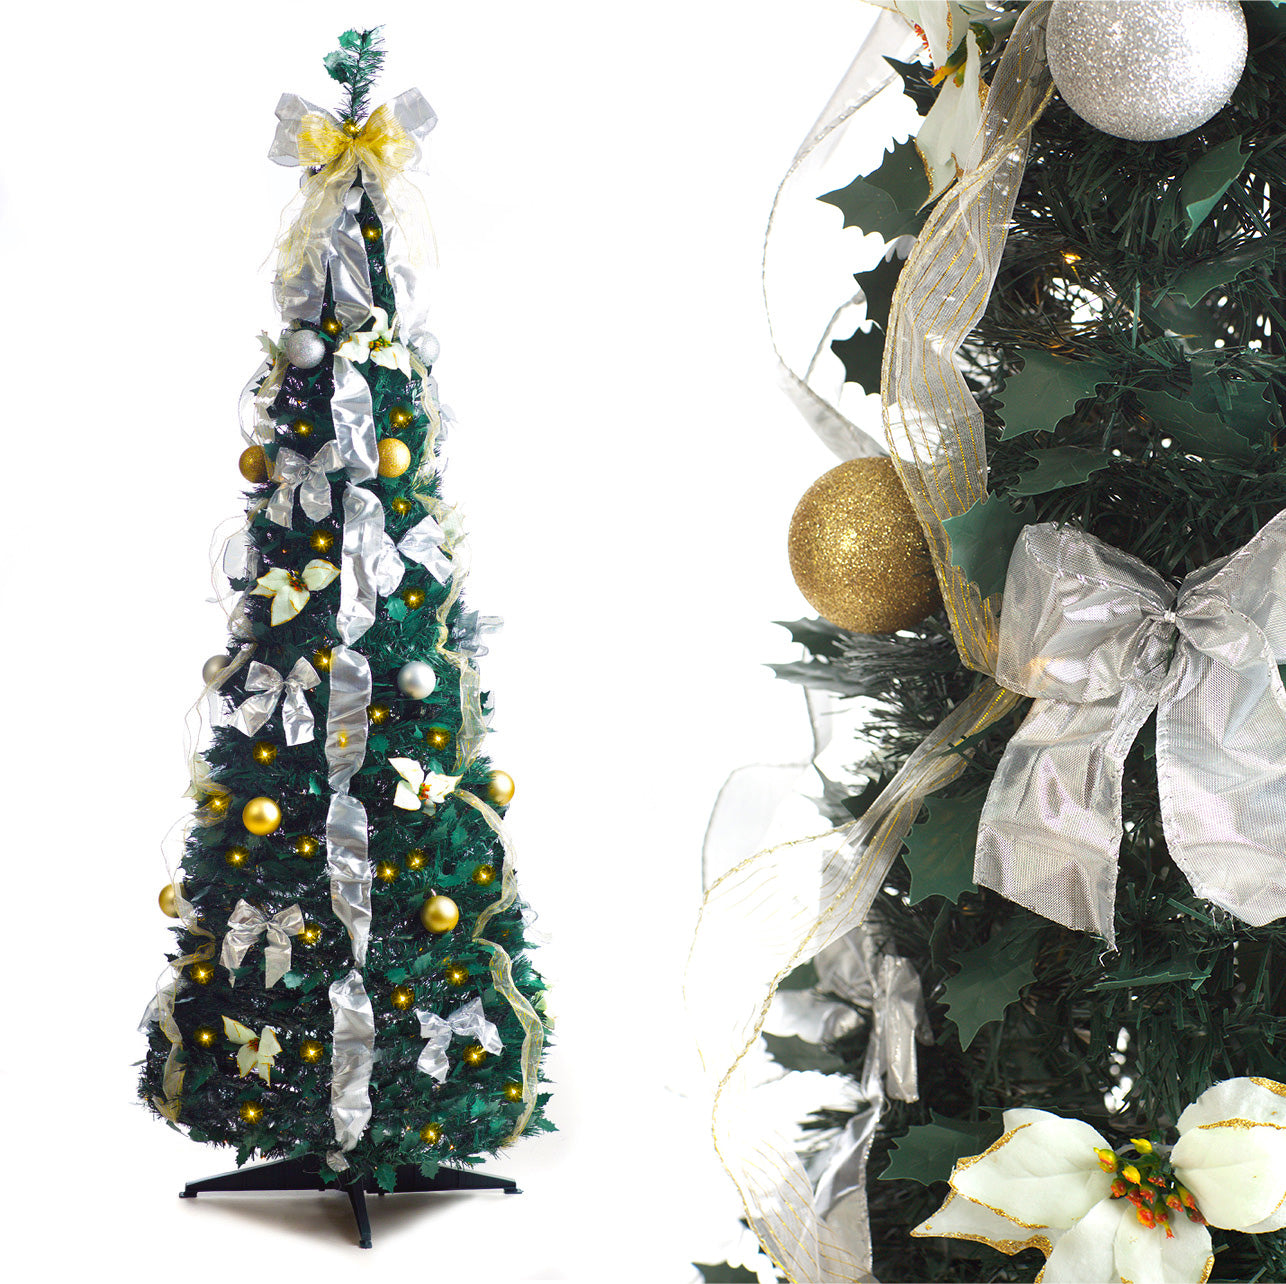 Best Artificial Pop-up 6ft Pre-Decorated Pre-Lit Christmas Trees